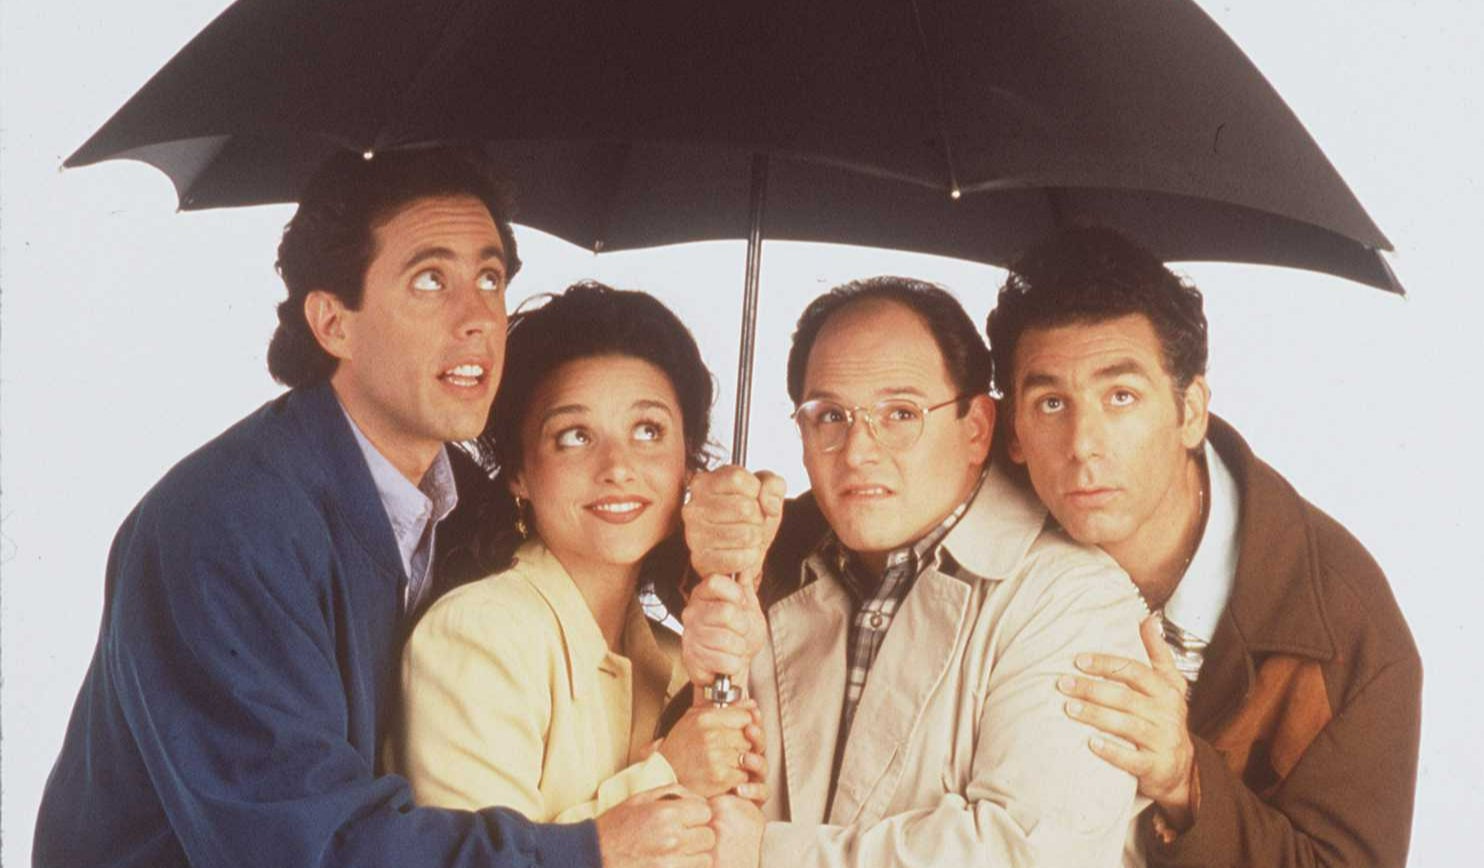 The cast of ‘Seinfeld’